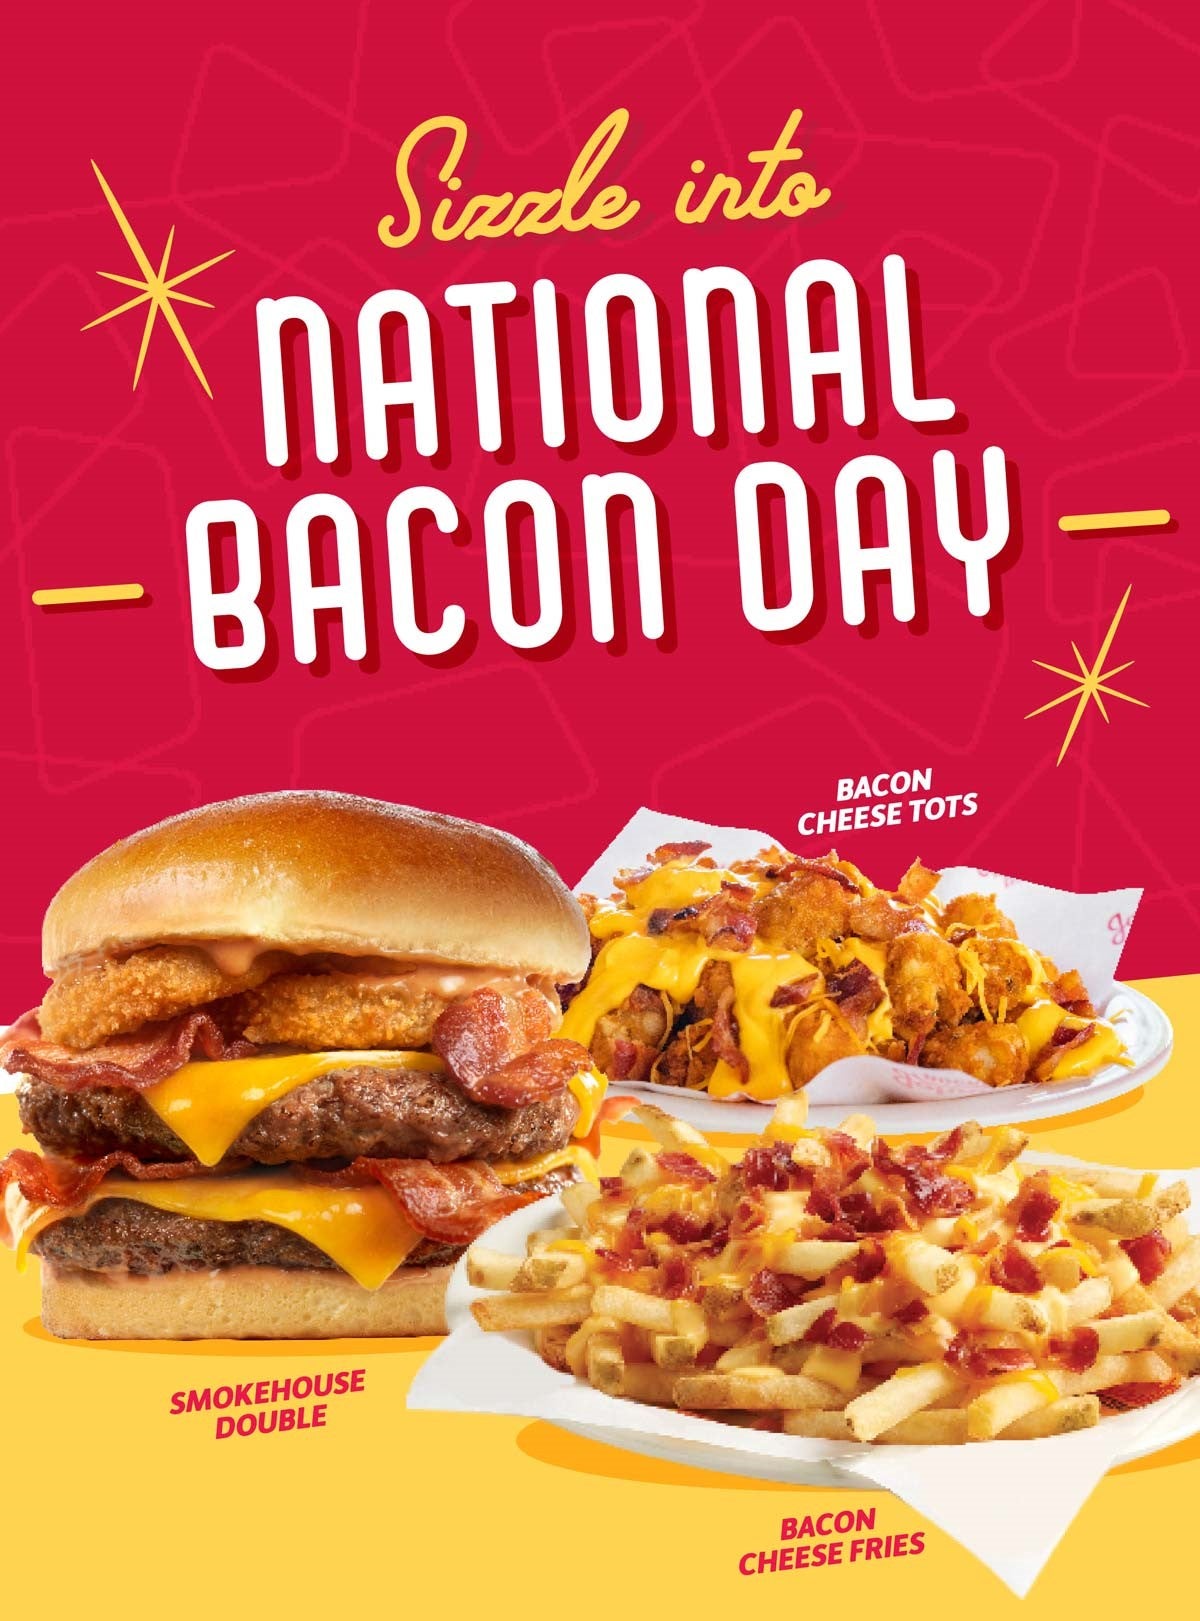 Celebrate National Bacon Day with us!